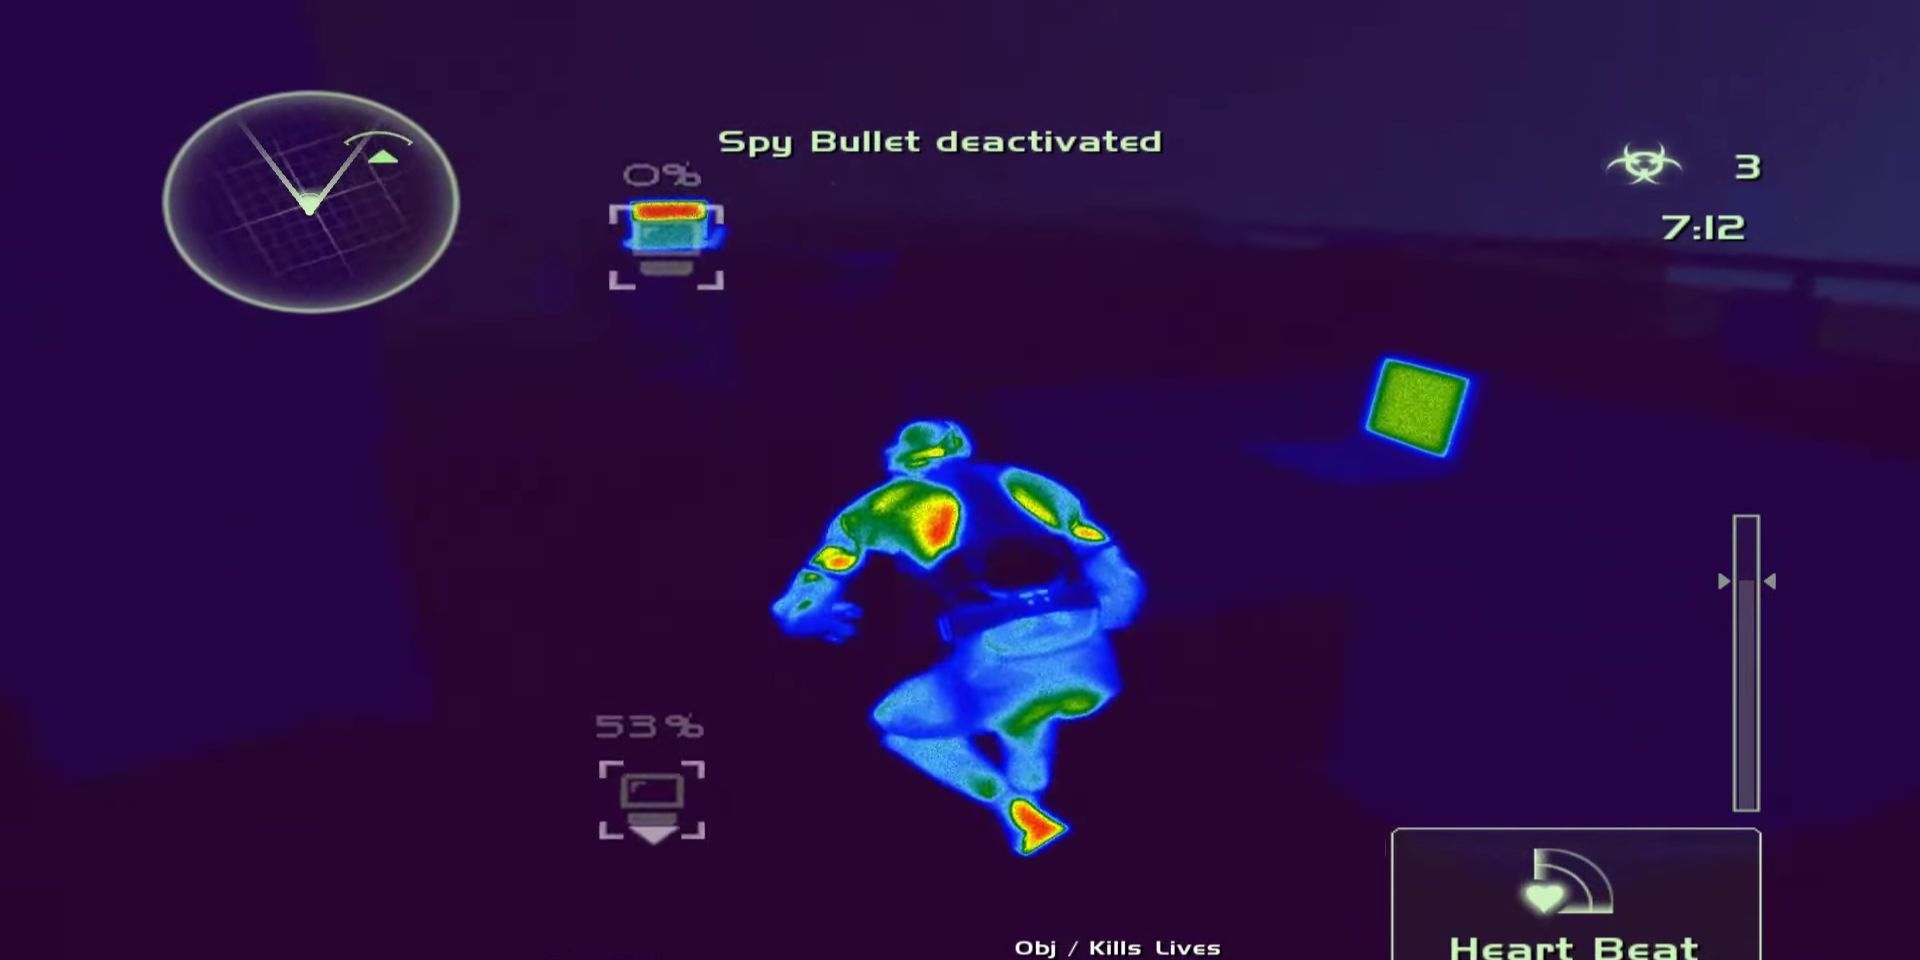 Vision thermographique dans Splinter Cell Chaos Theory